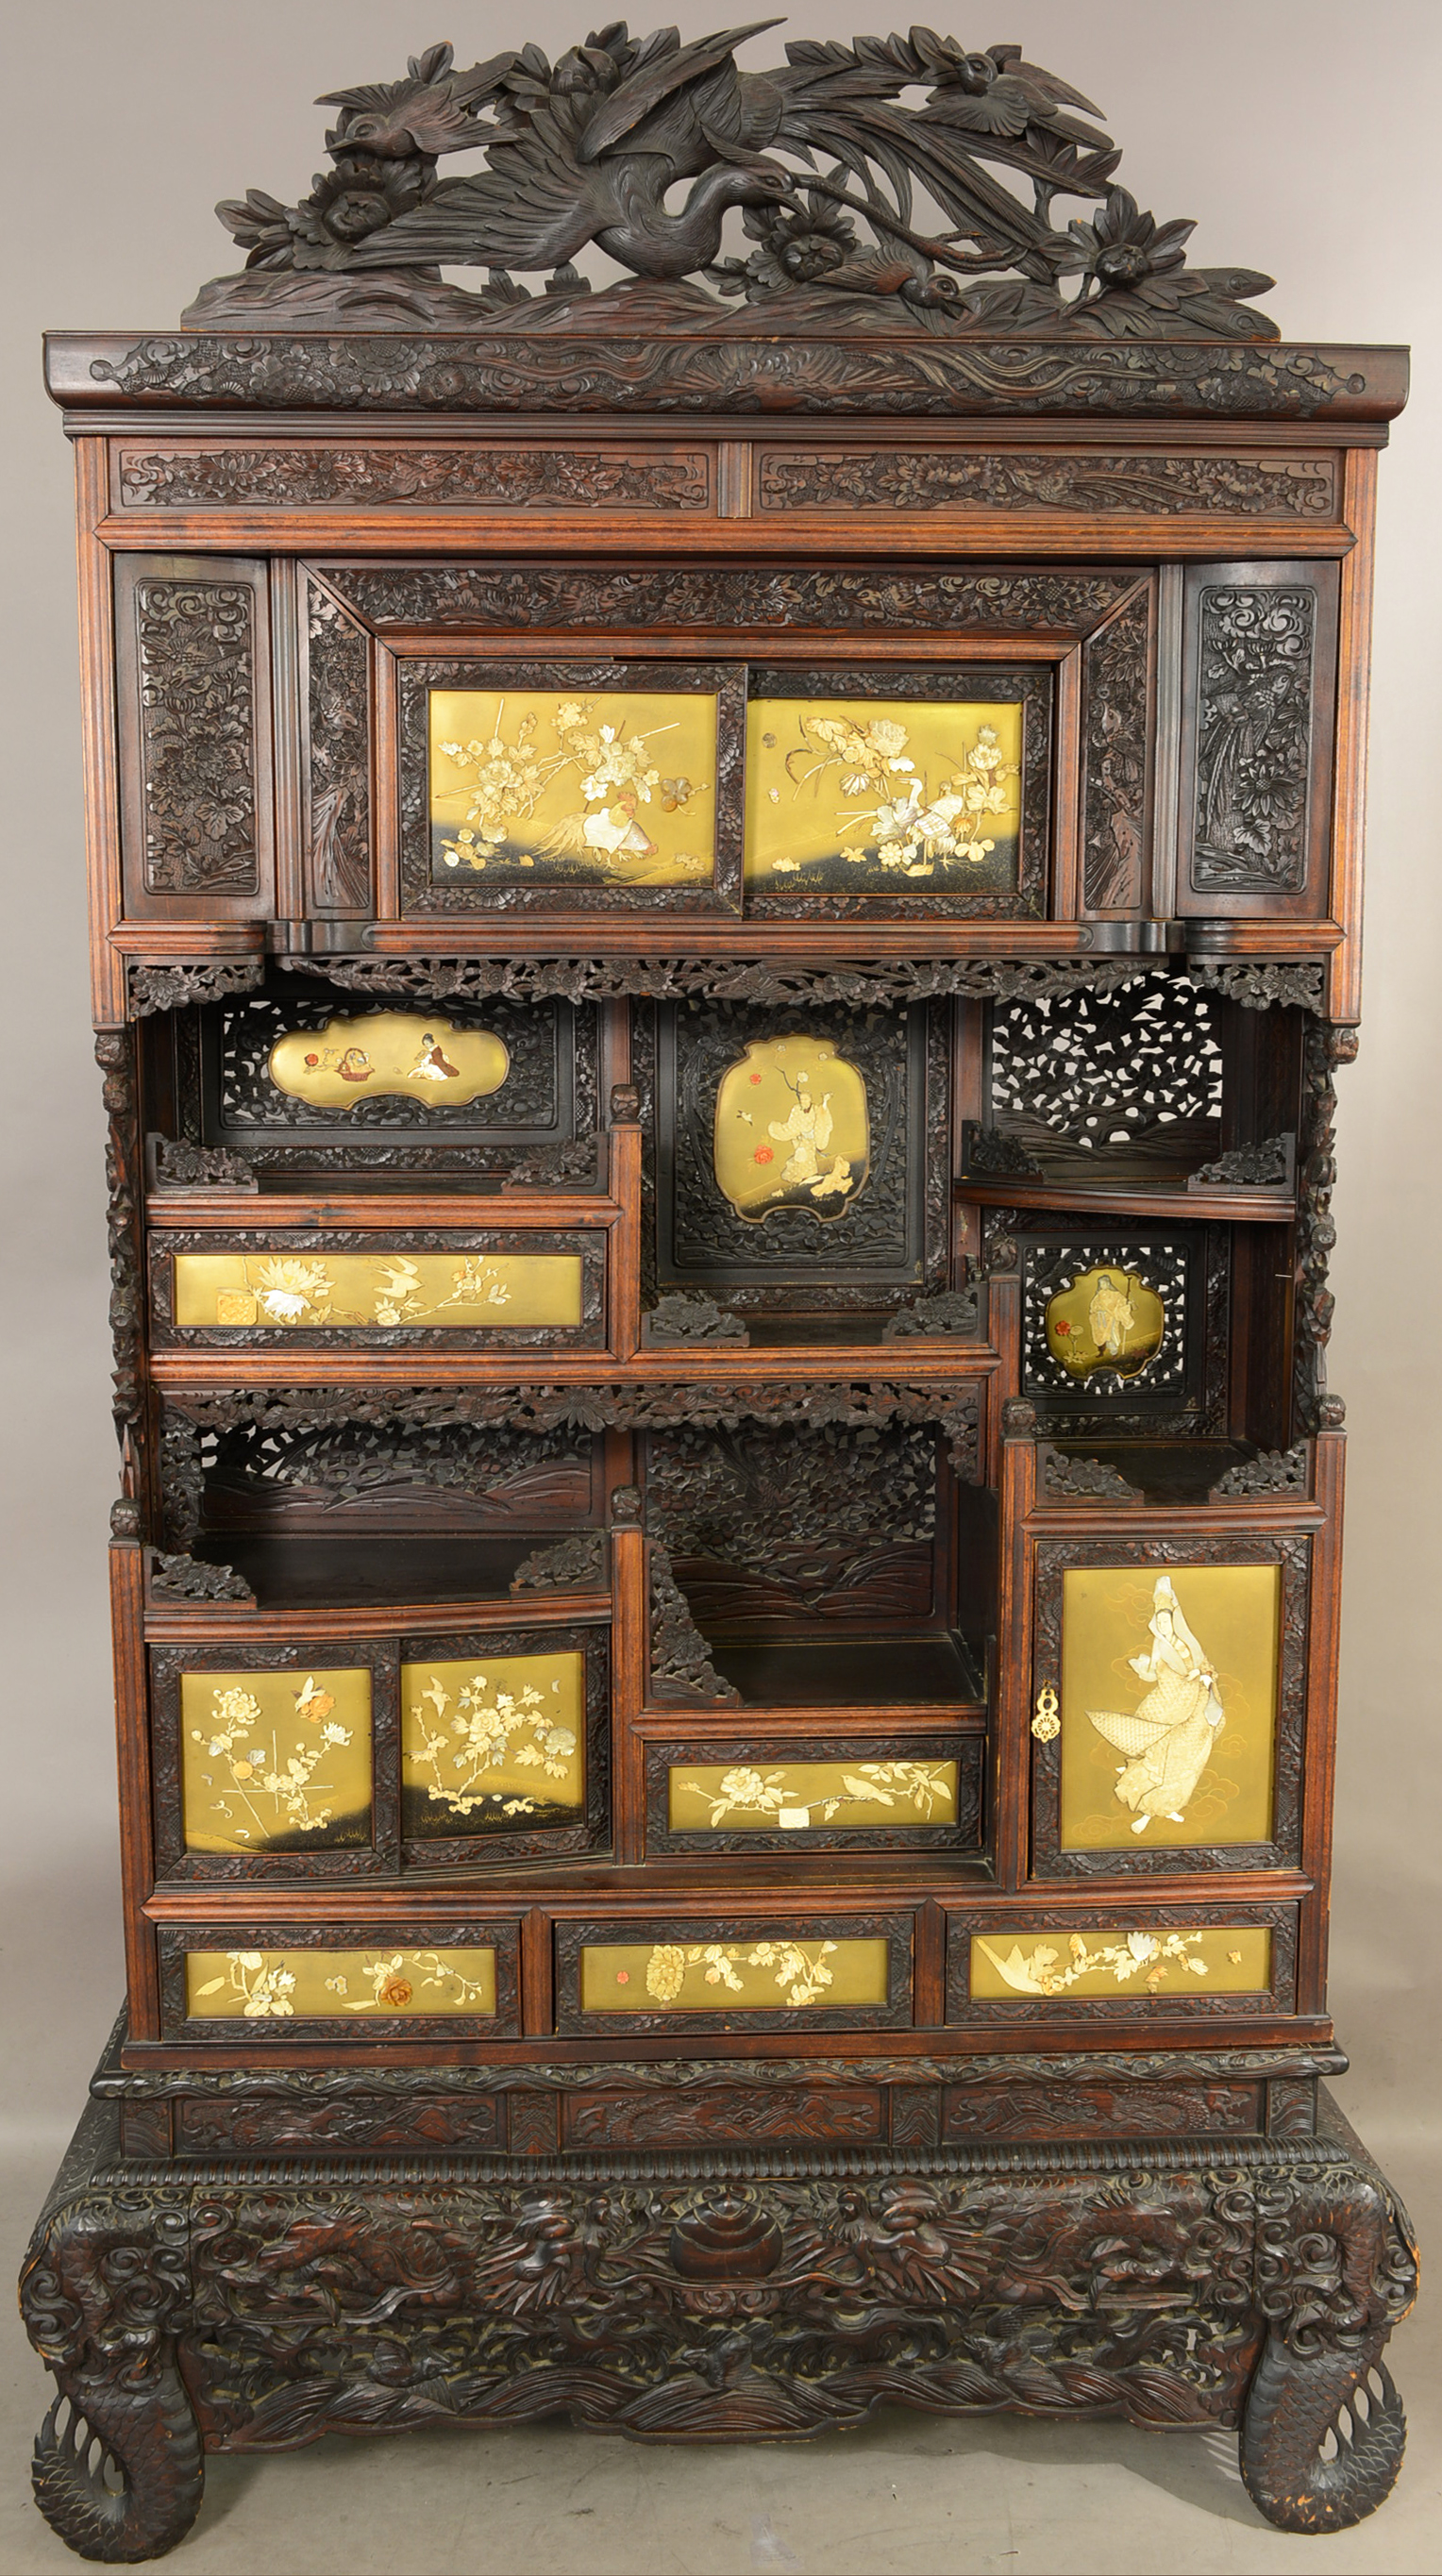 Chinese-style carved cabinet with birds and flowers carved in crest, scenic carved panels on heavily carved base, 83in high x 45in wide, circa 1910. Estimate: $1,800-$2,400. Bruhns Auction Gallery image